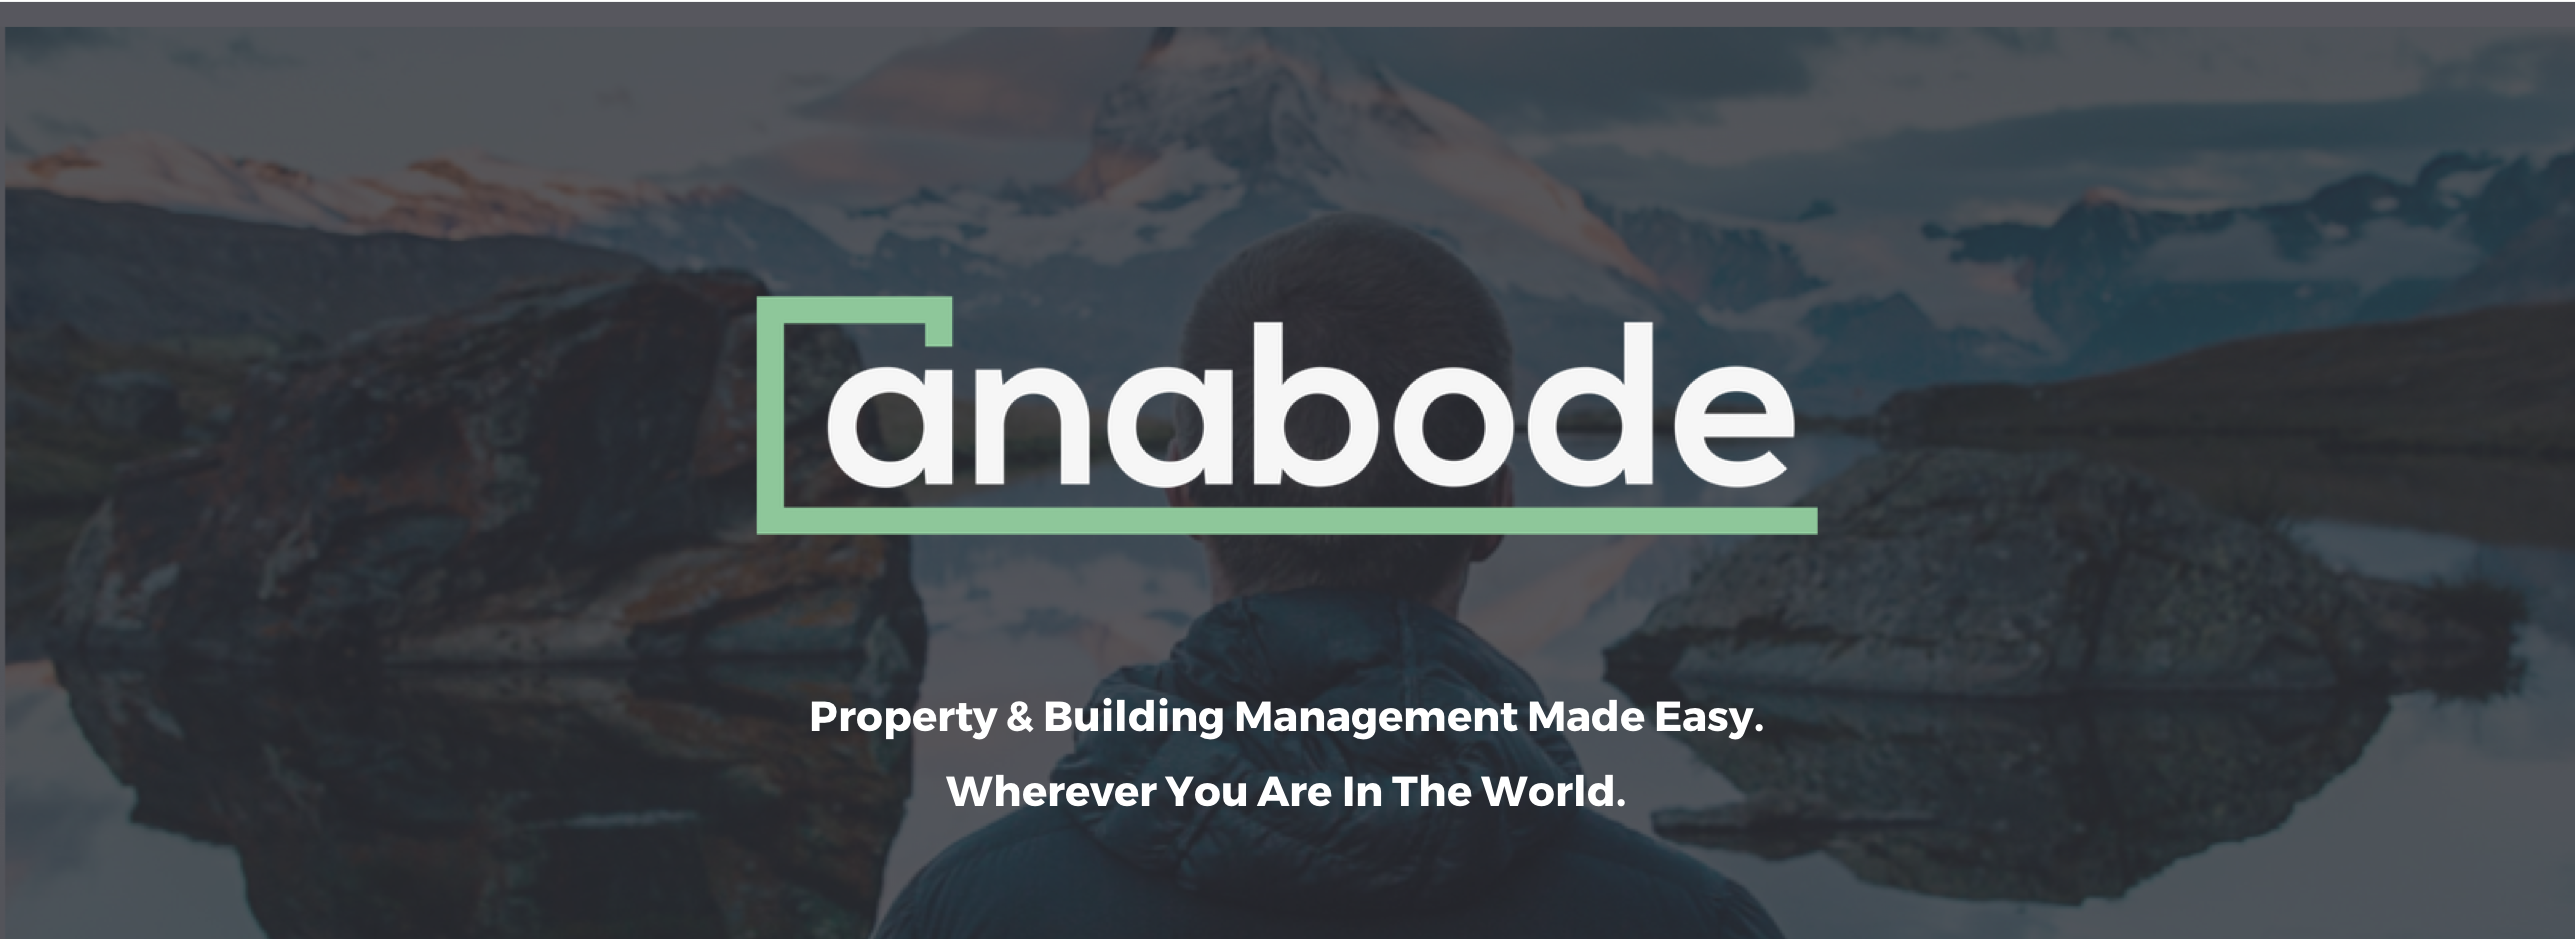 Anabode Landing page